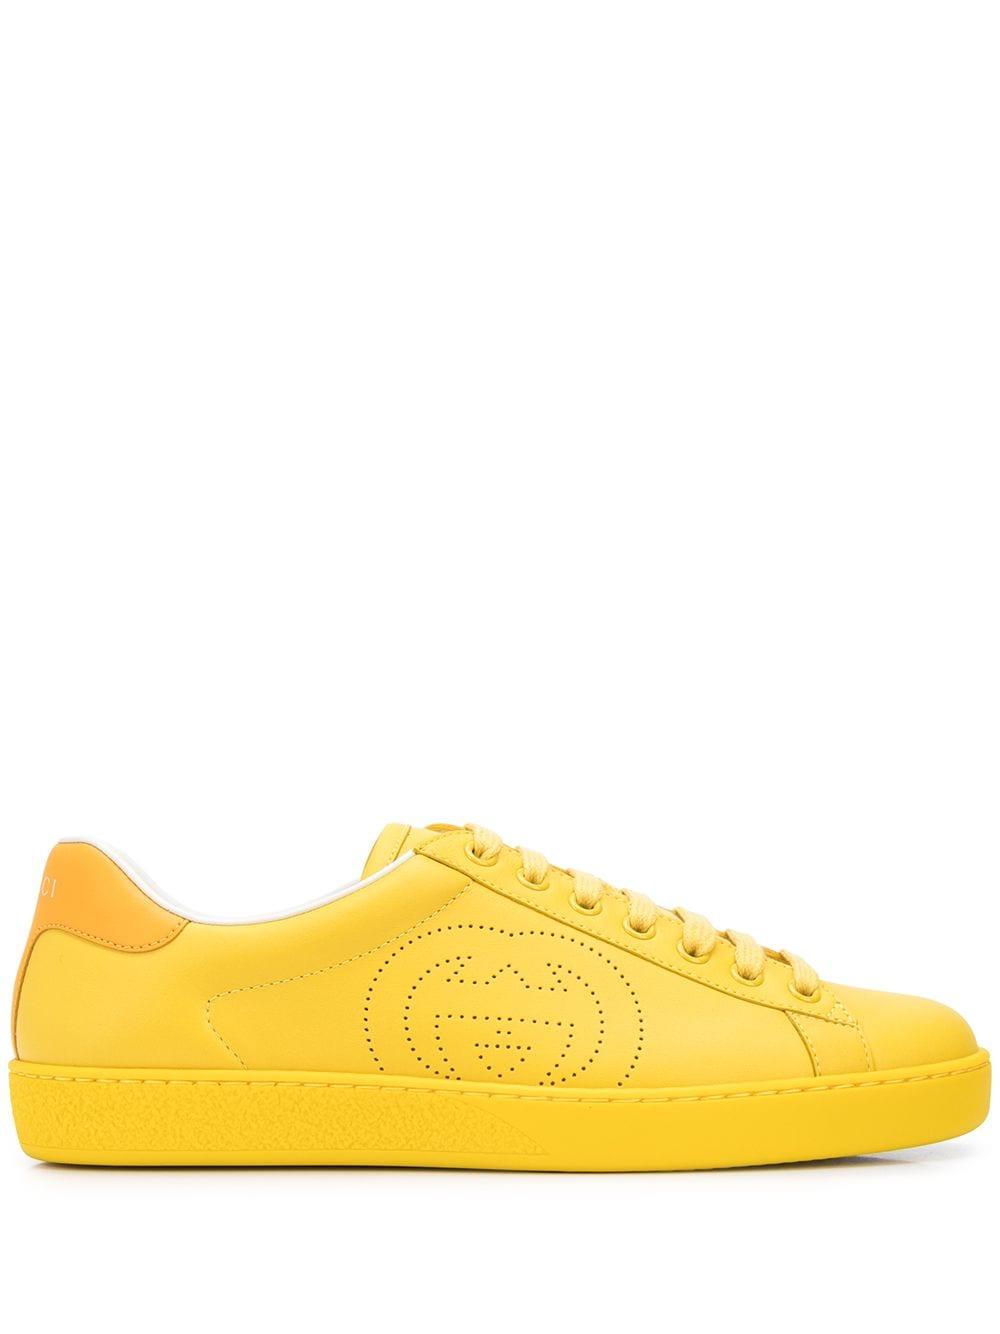 Gucci New Ace Perforated Logo Sneaker in Yellow for Men - Save 55% - Lyst